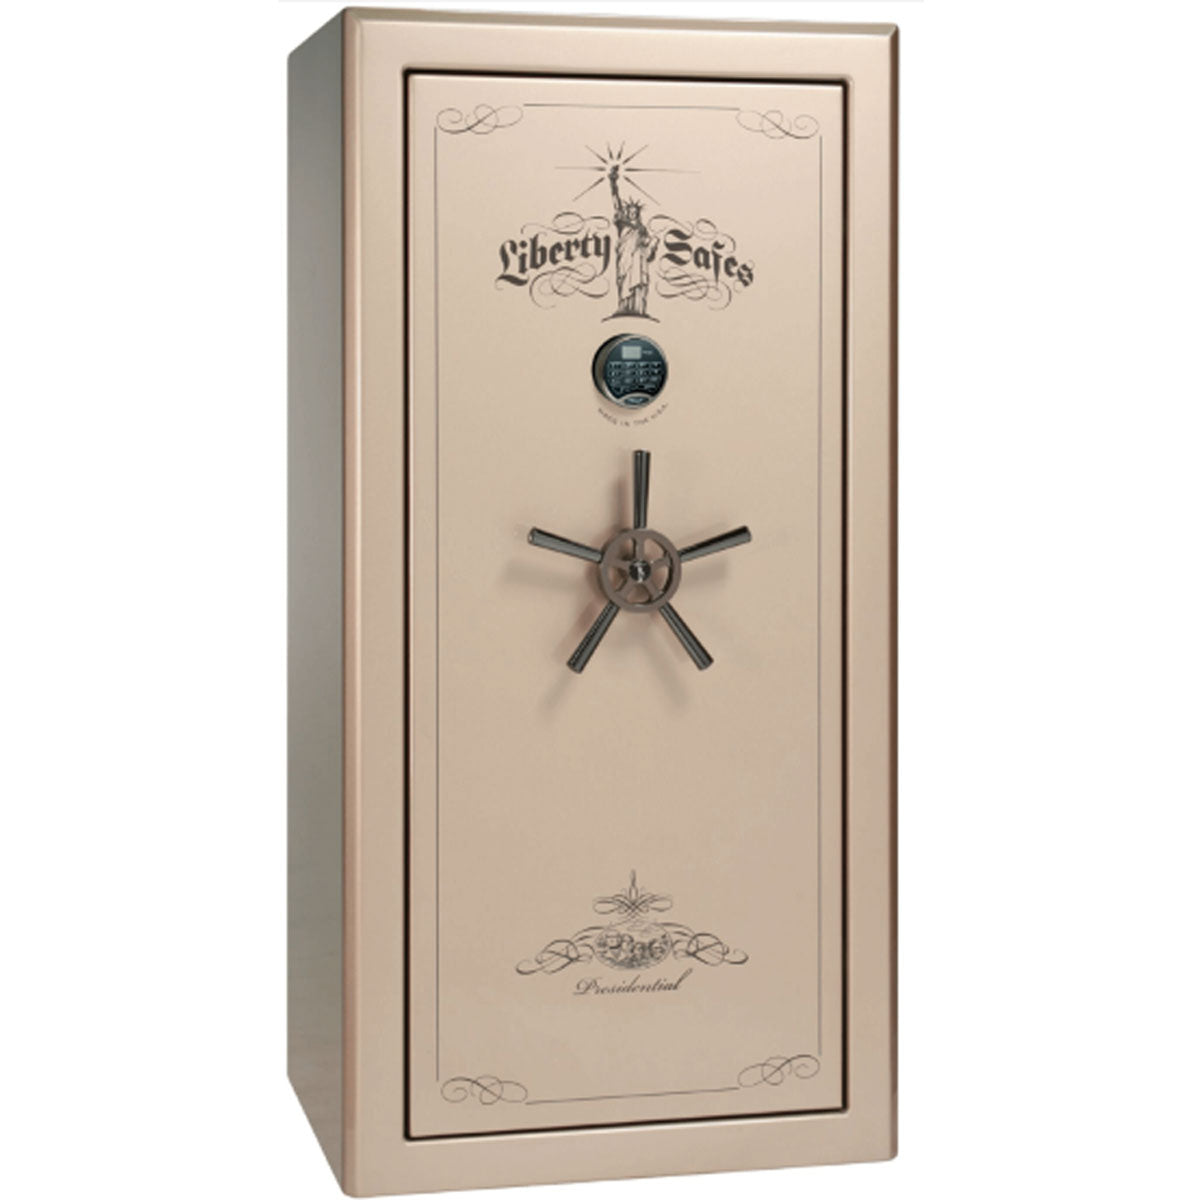 Liberty Safe Presidential 25 in Champagne Gloss with Black Chrome Electronic Lock, closed door.